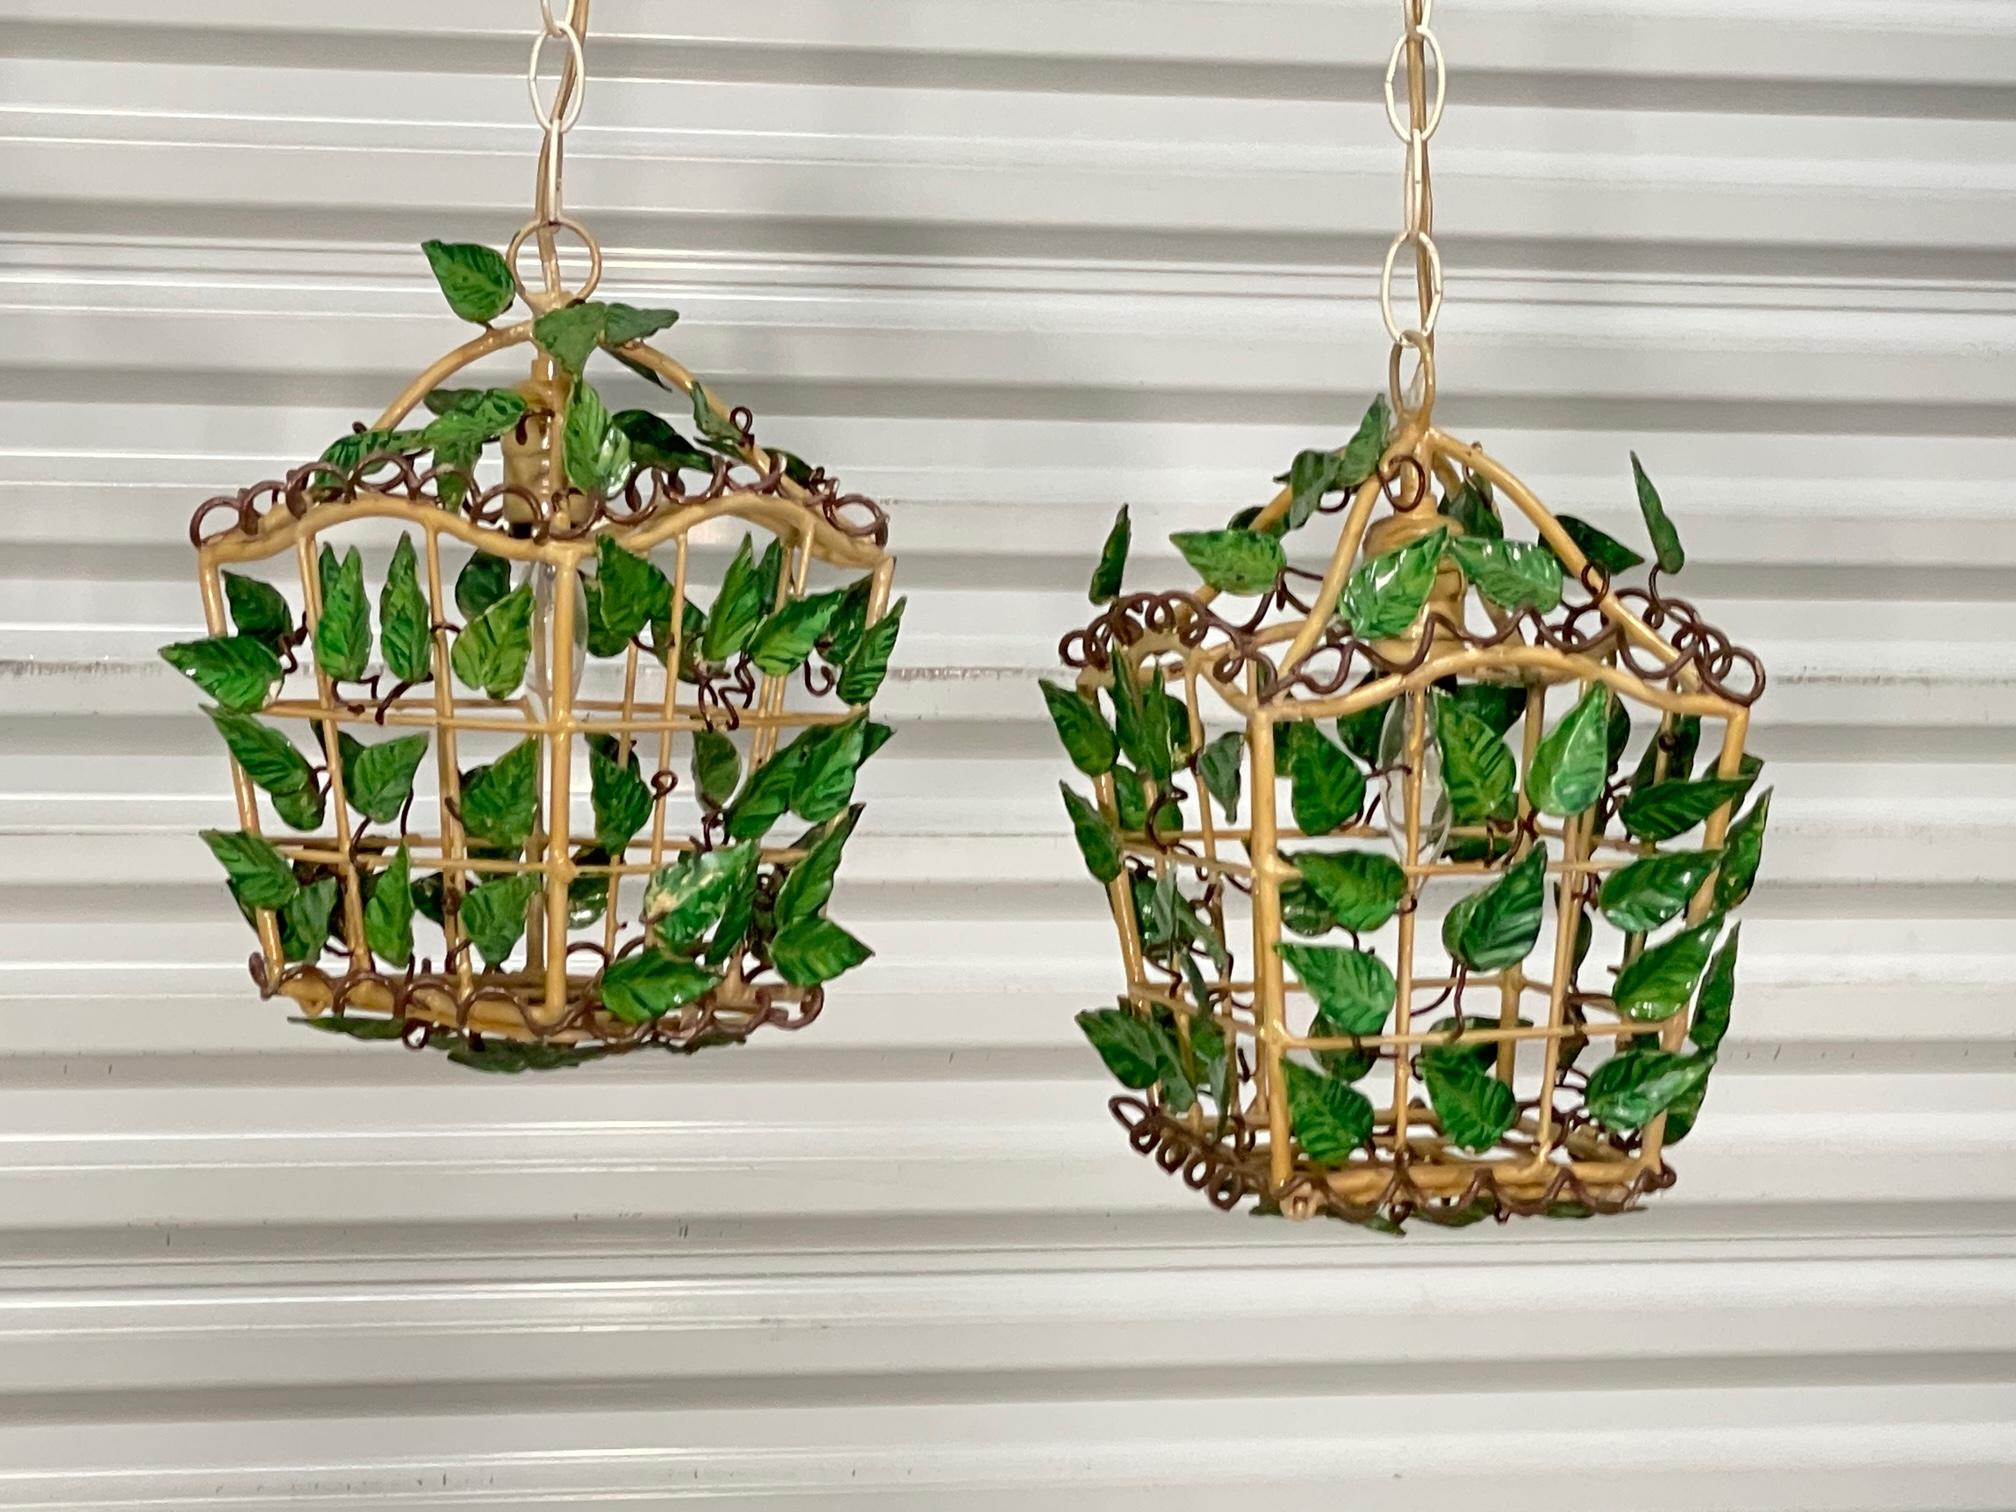 Pair of vintage hand painted pendant lights feature a lantern design with tole vines and leaves throughout. Good condition with imperfections consistent with age, see photos for condition details. 
For a shipping quote to your exact zip code, please